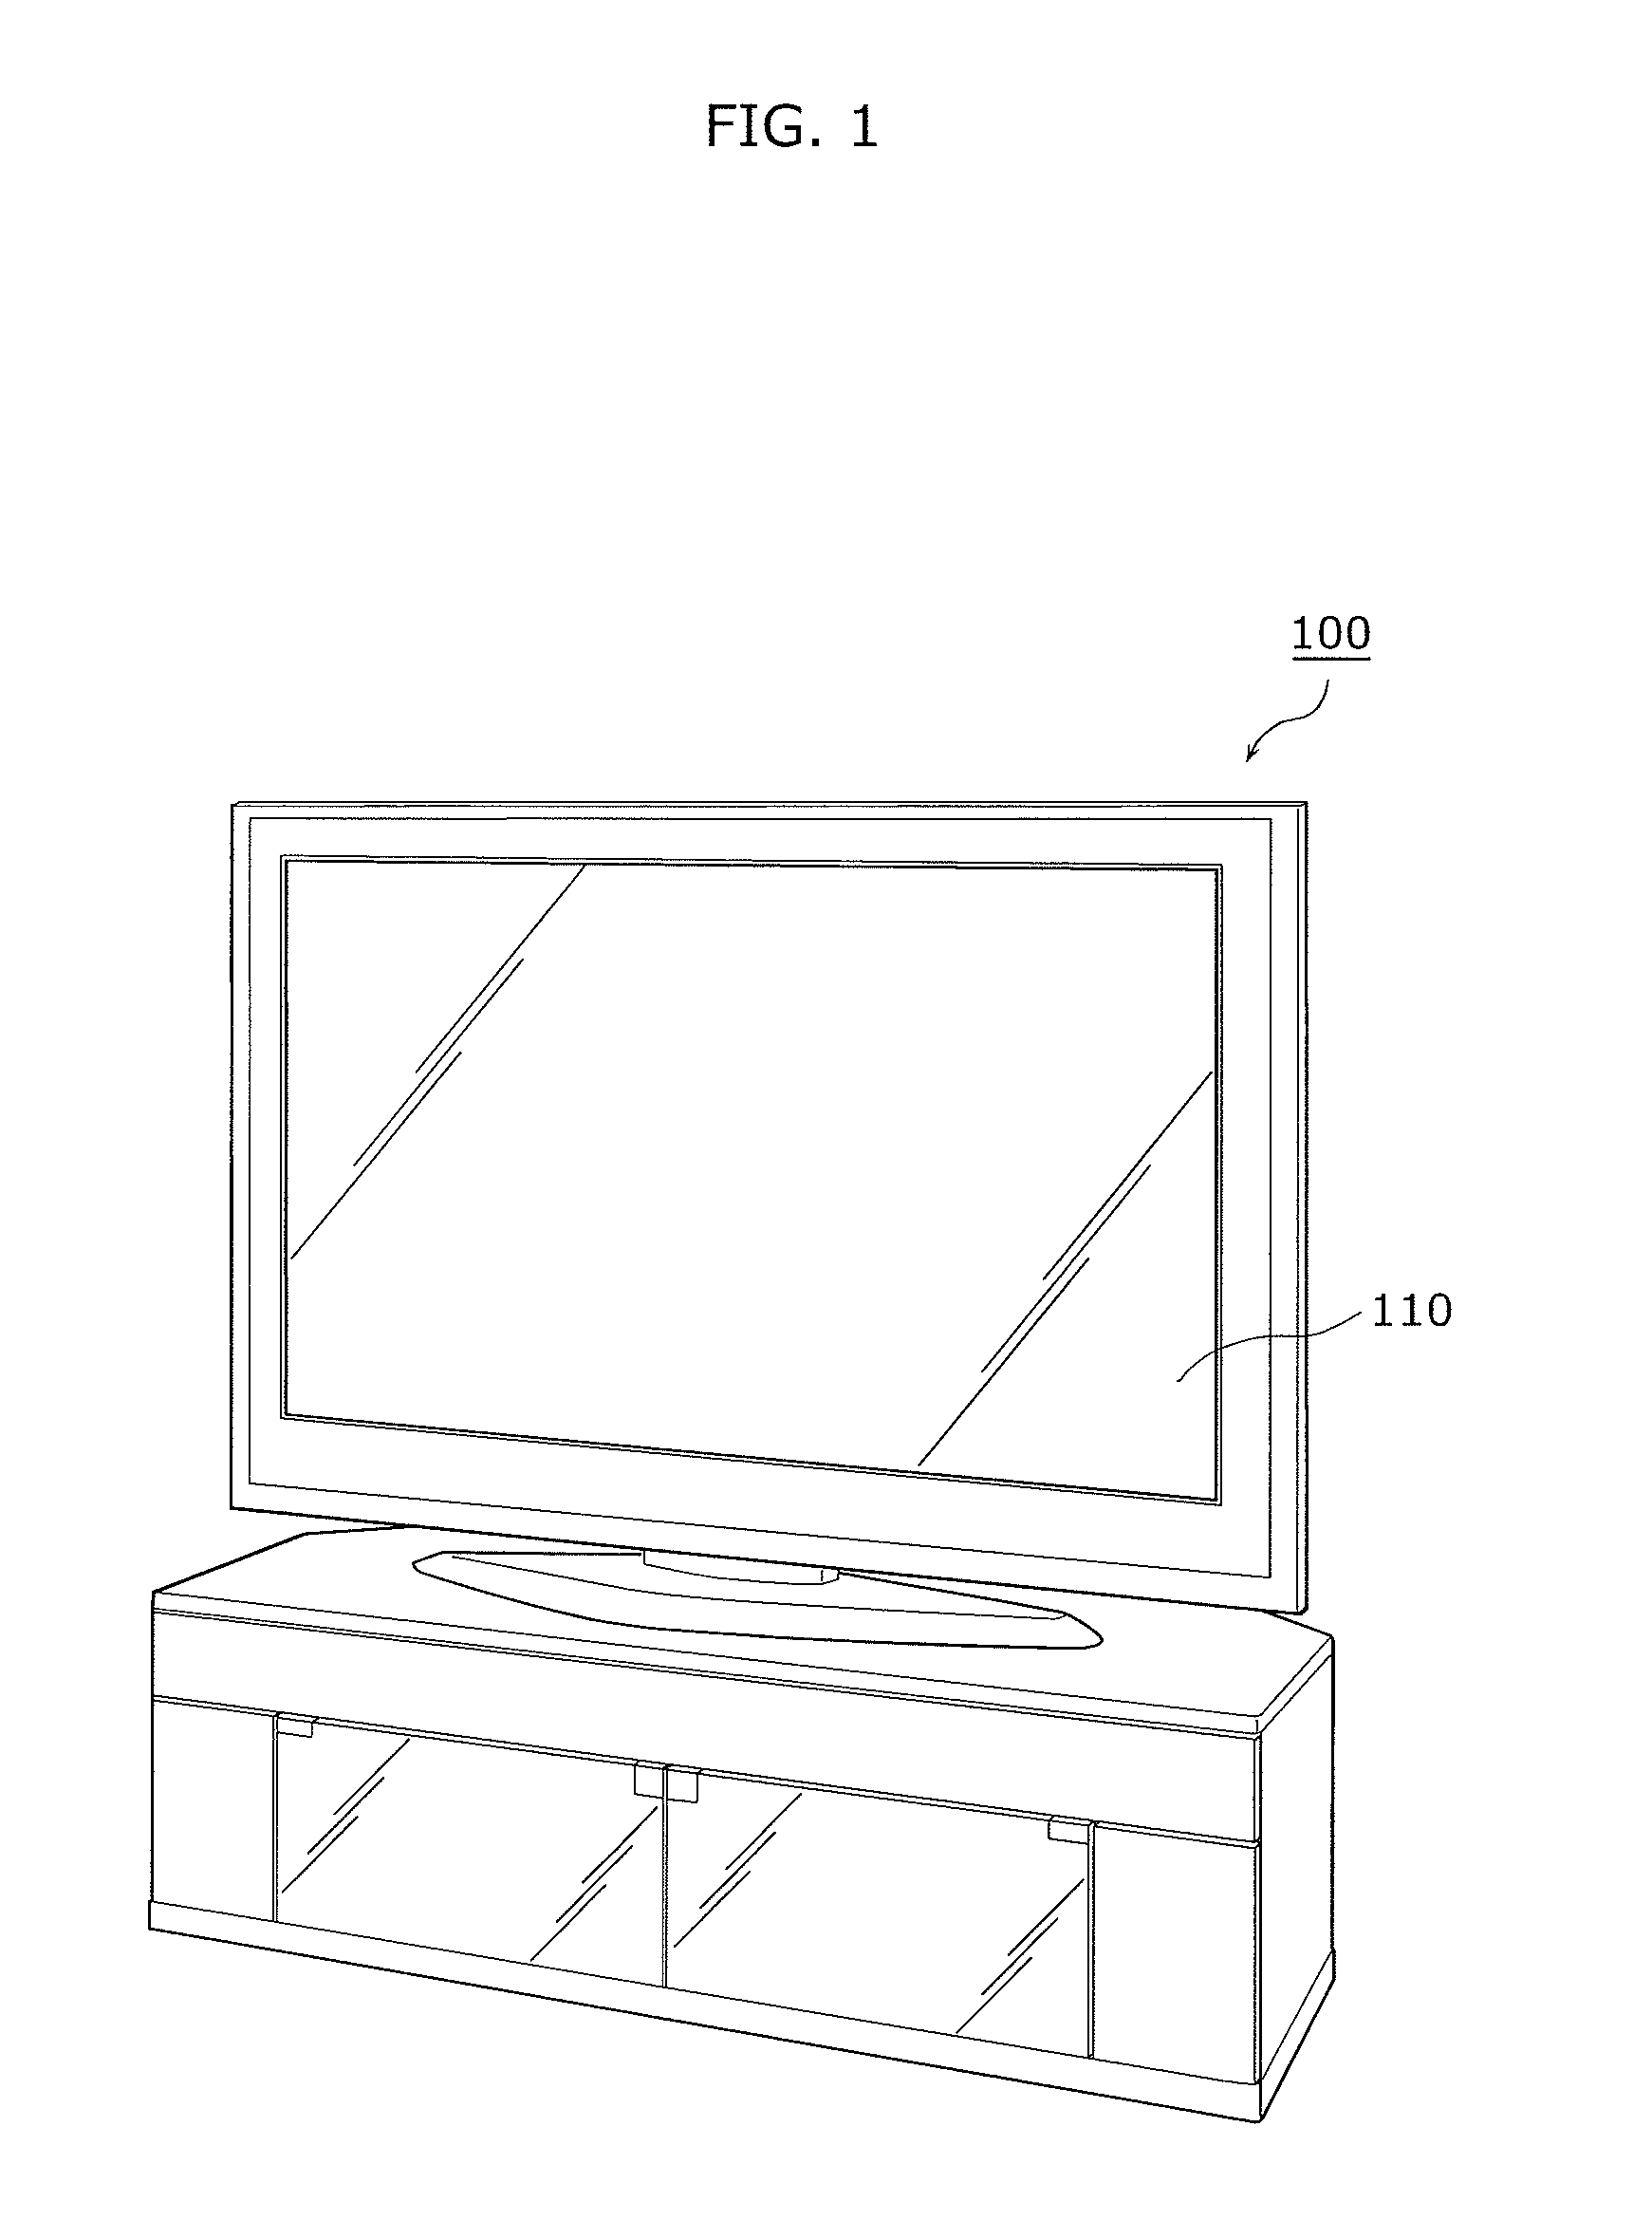 Electro luminescence panel and method for manufacturing electro luminescence panel